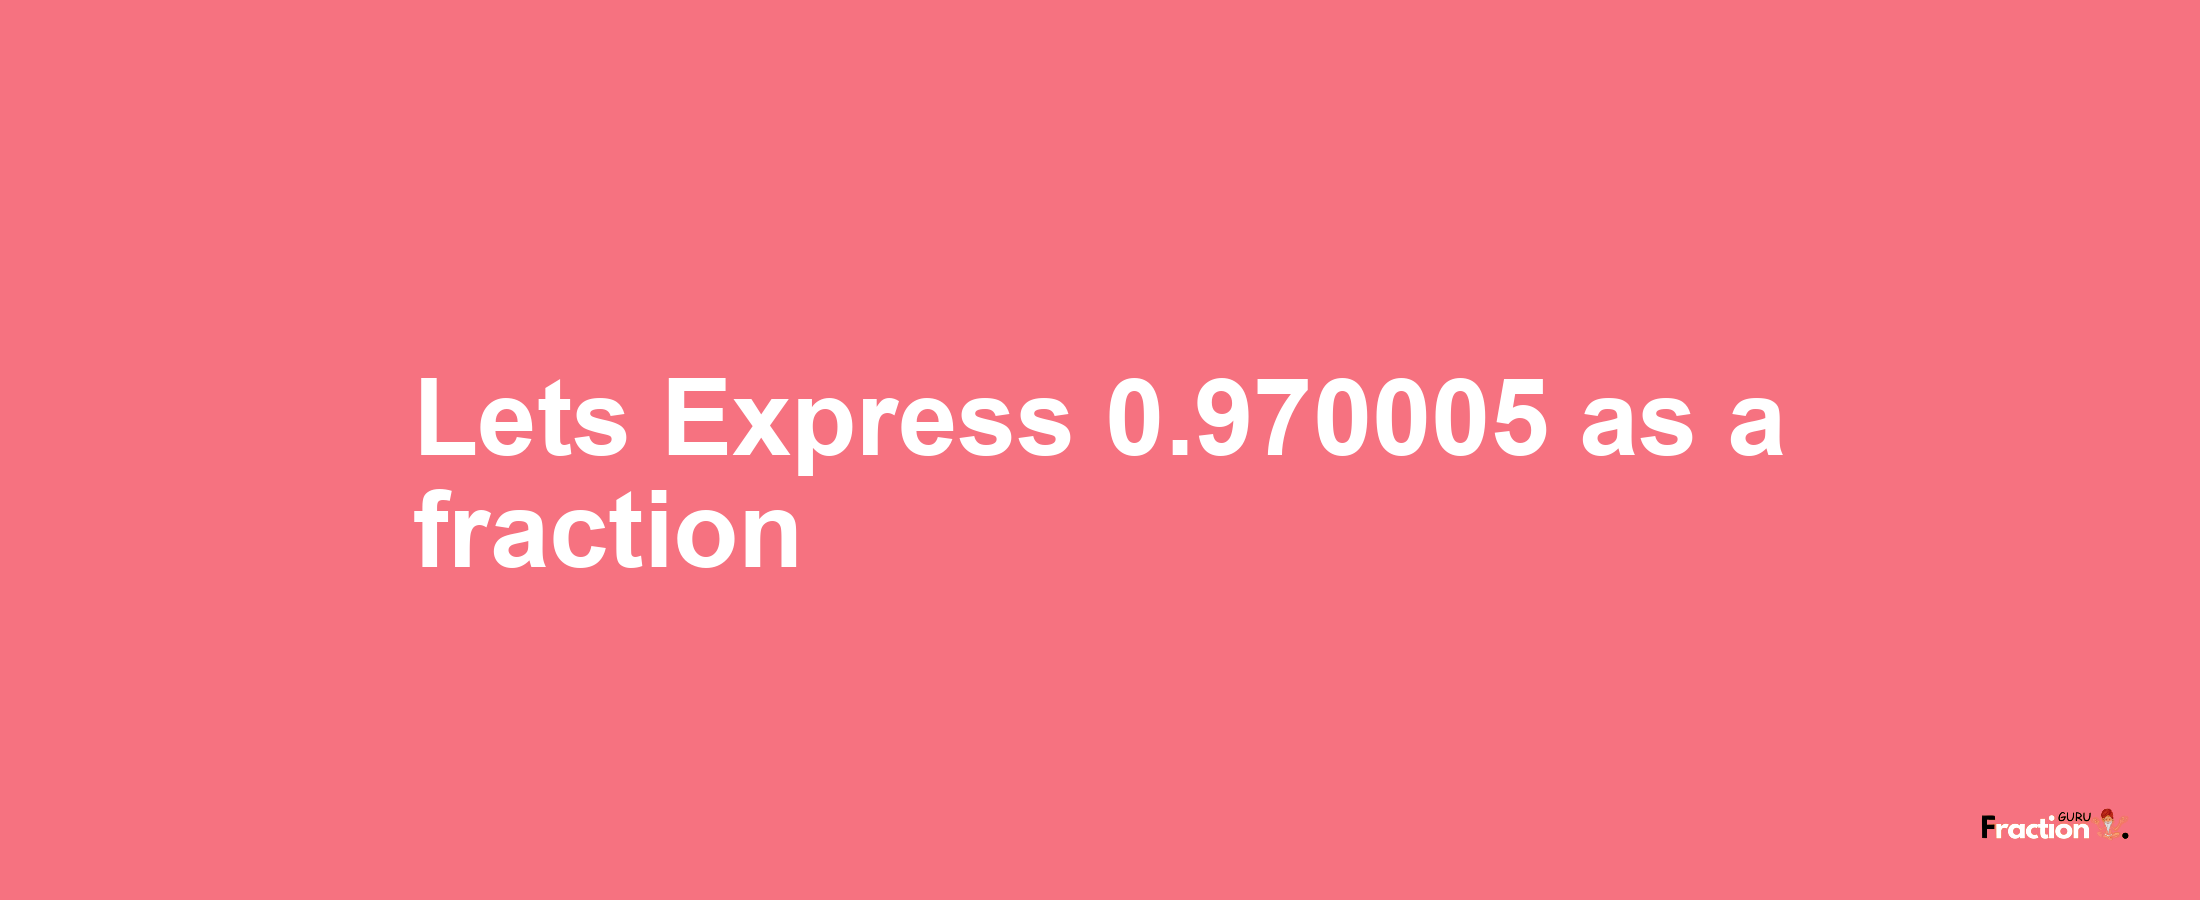 Lets Express 0.970005 as afraction